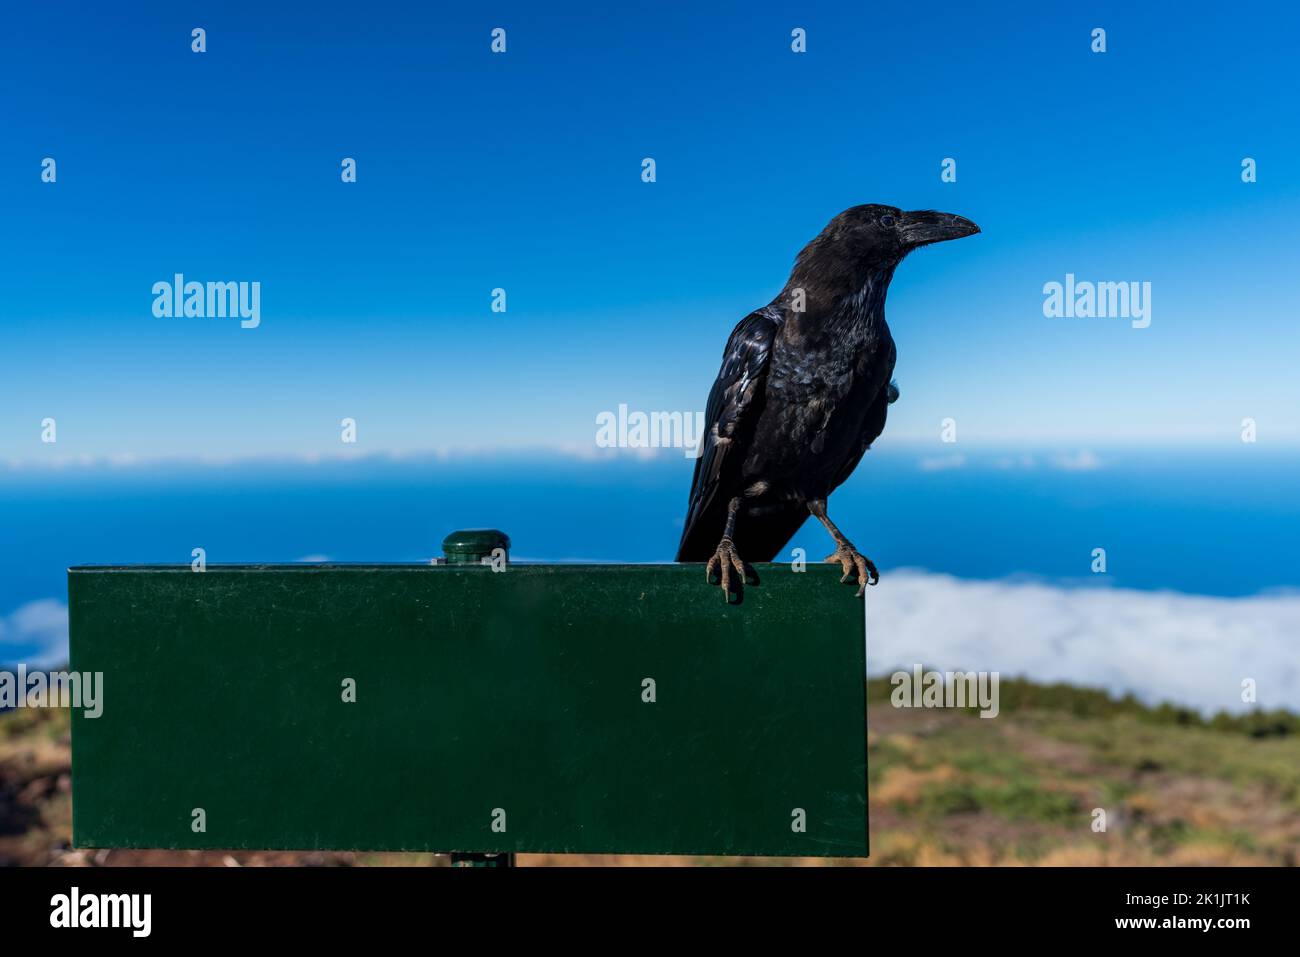 Crow over green sign for text space Stock Photo